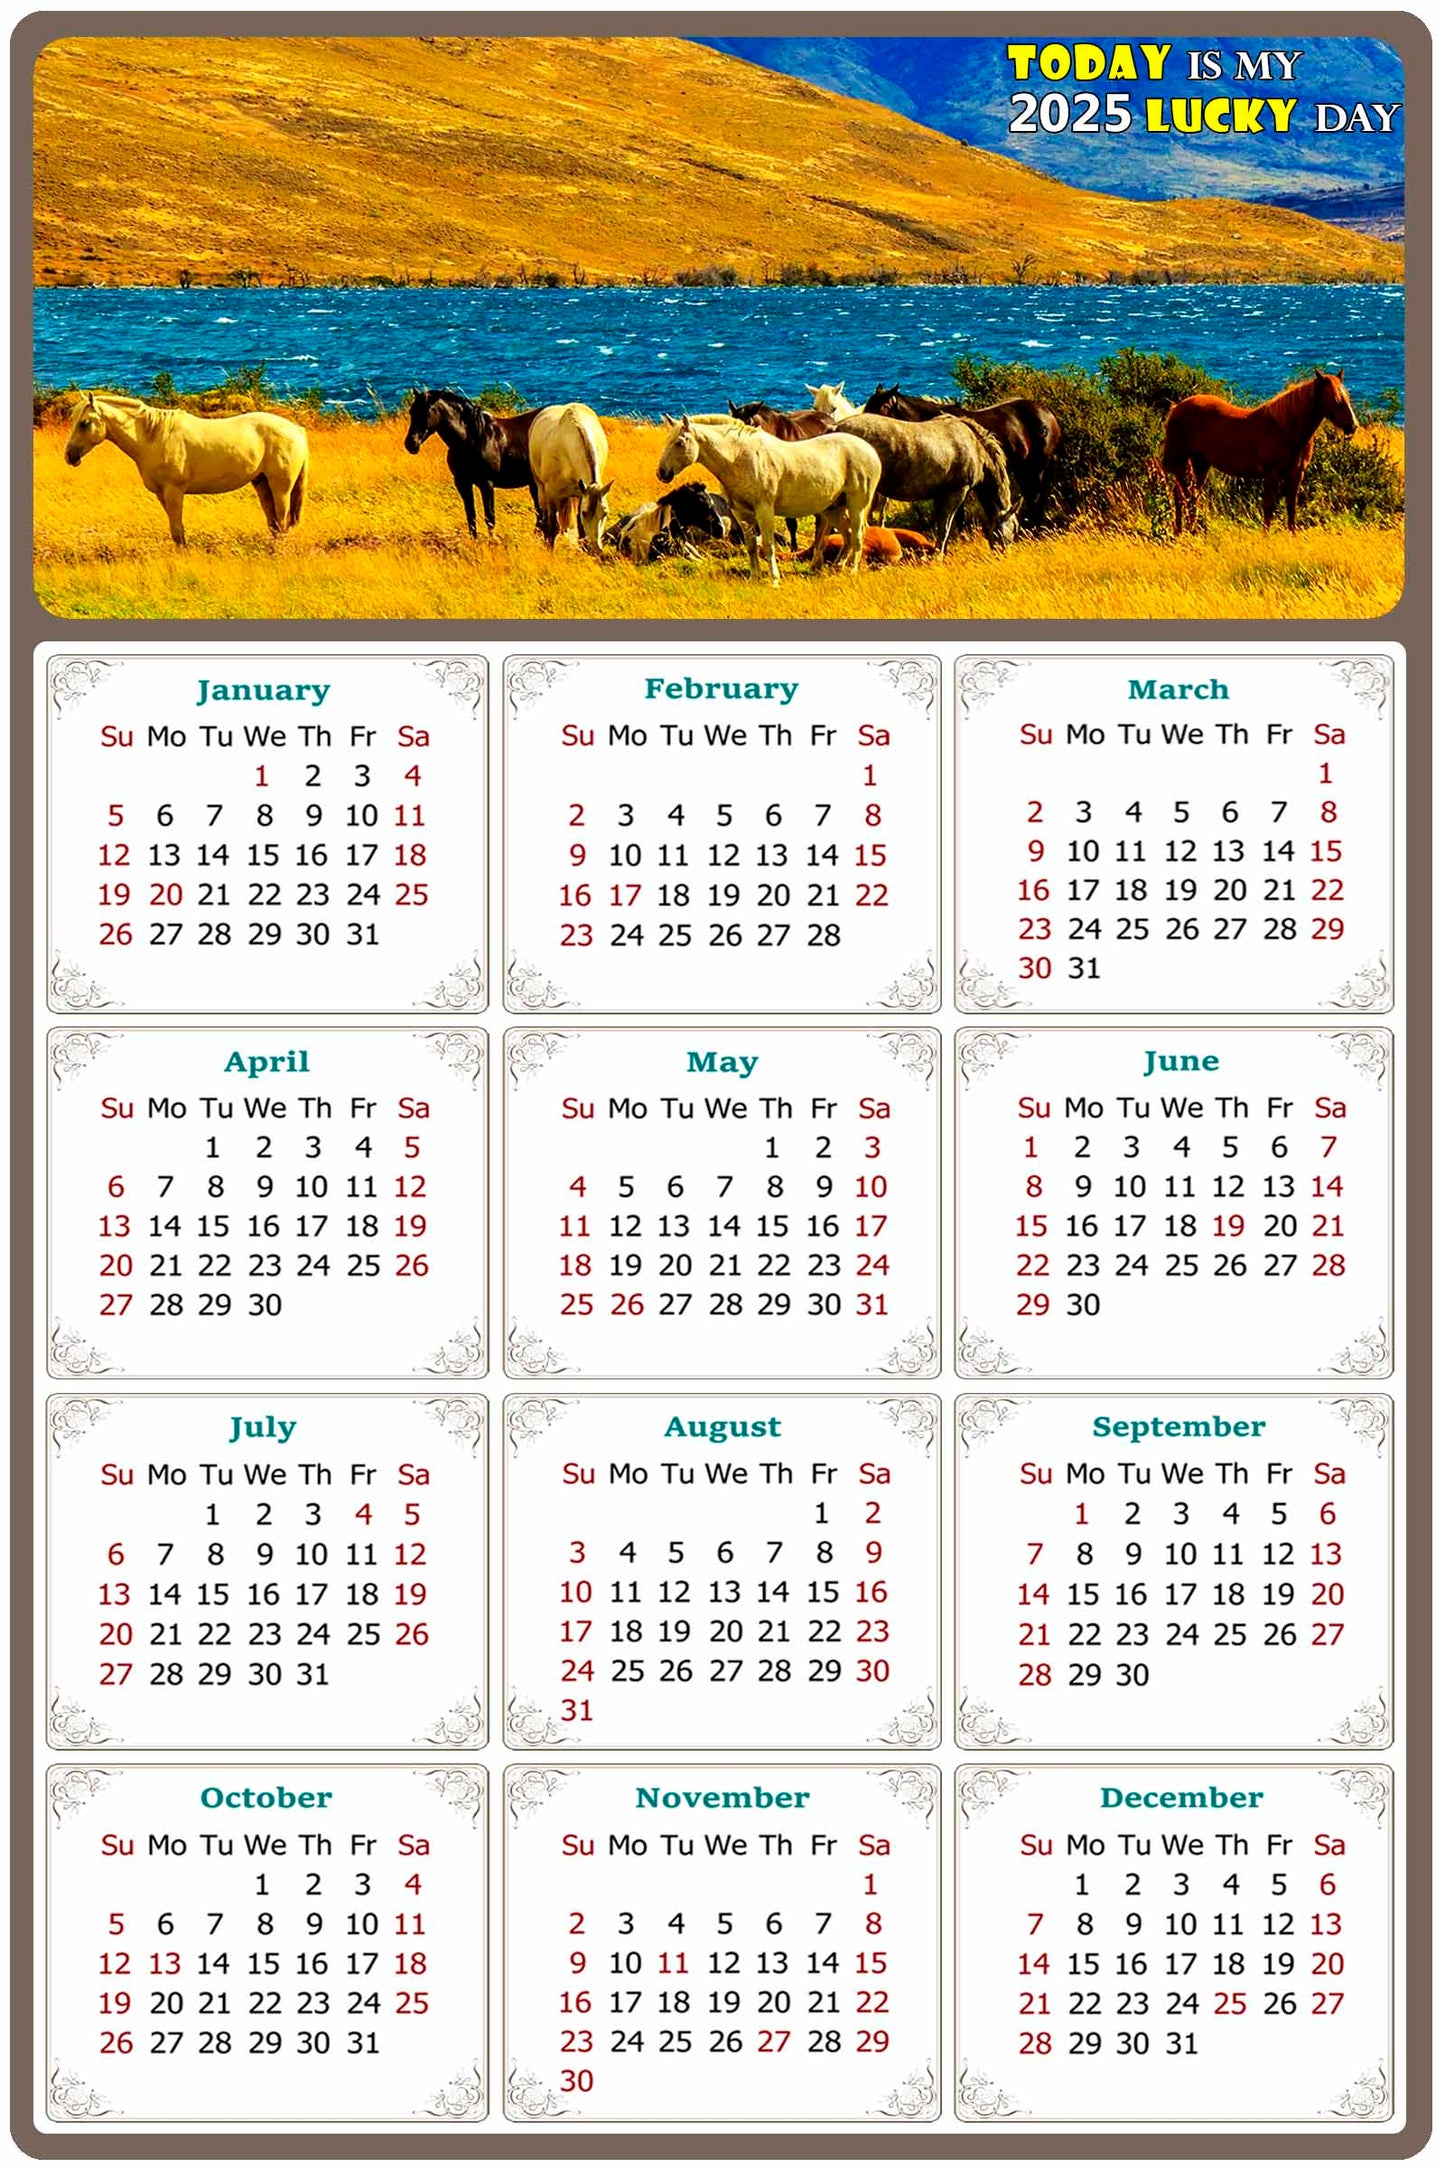 2025 Magnetic Calendar - Calendar Magnets - Today is my Lucky Day - (Fade, Tear, and Water Resistant) - Horses Themed 012